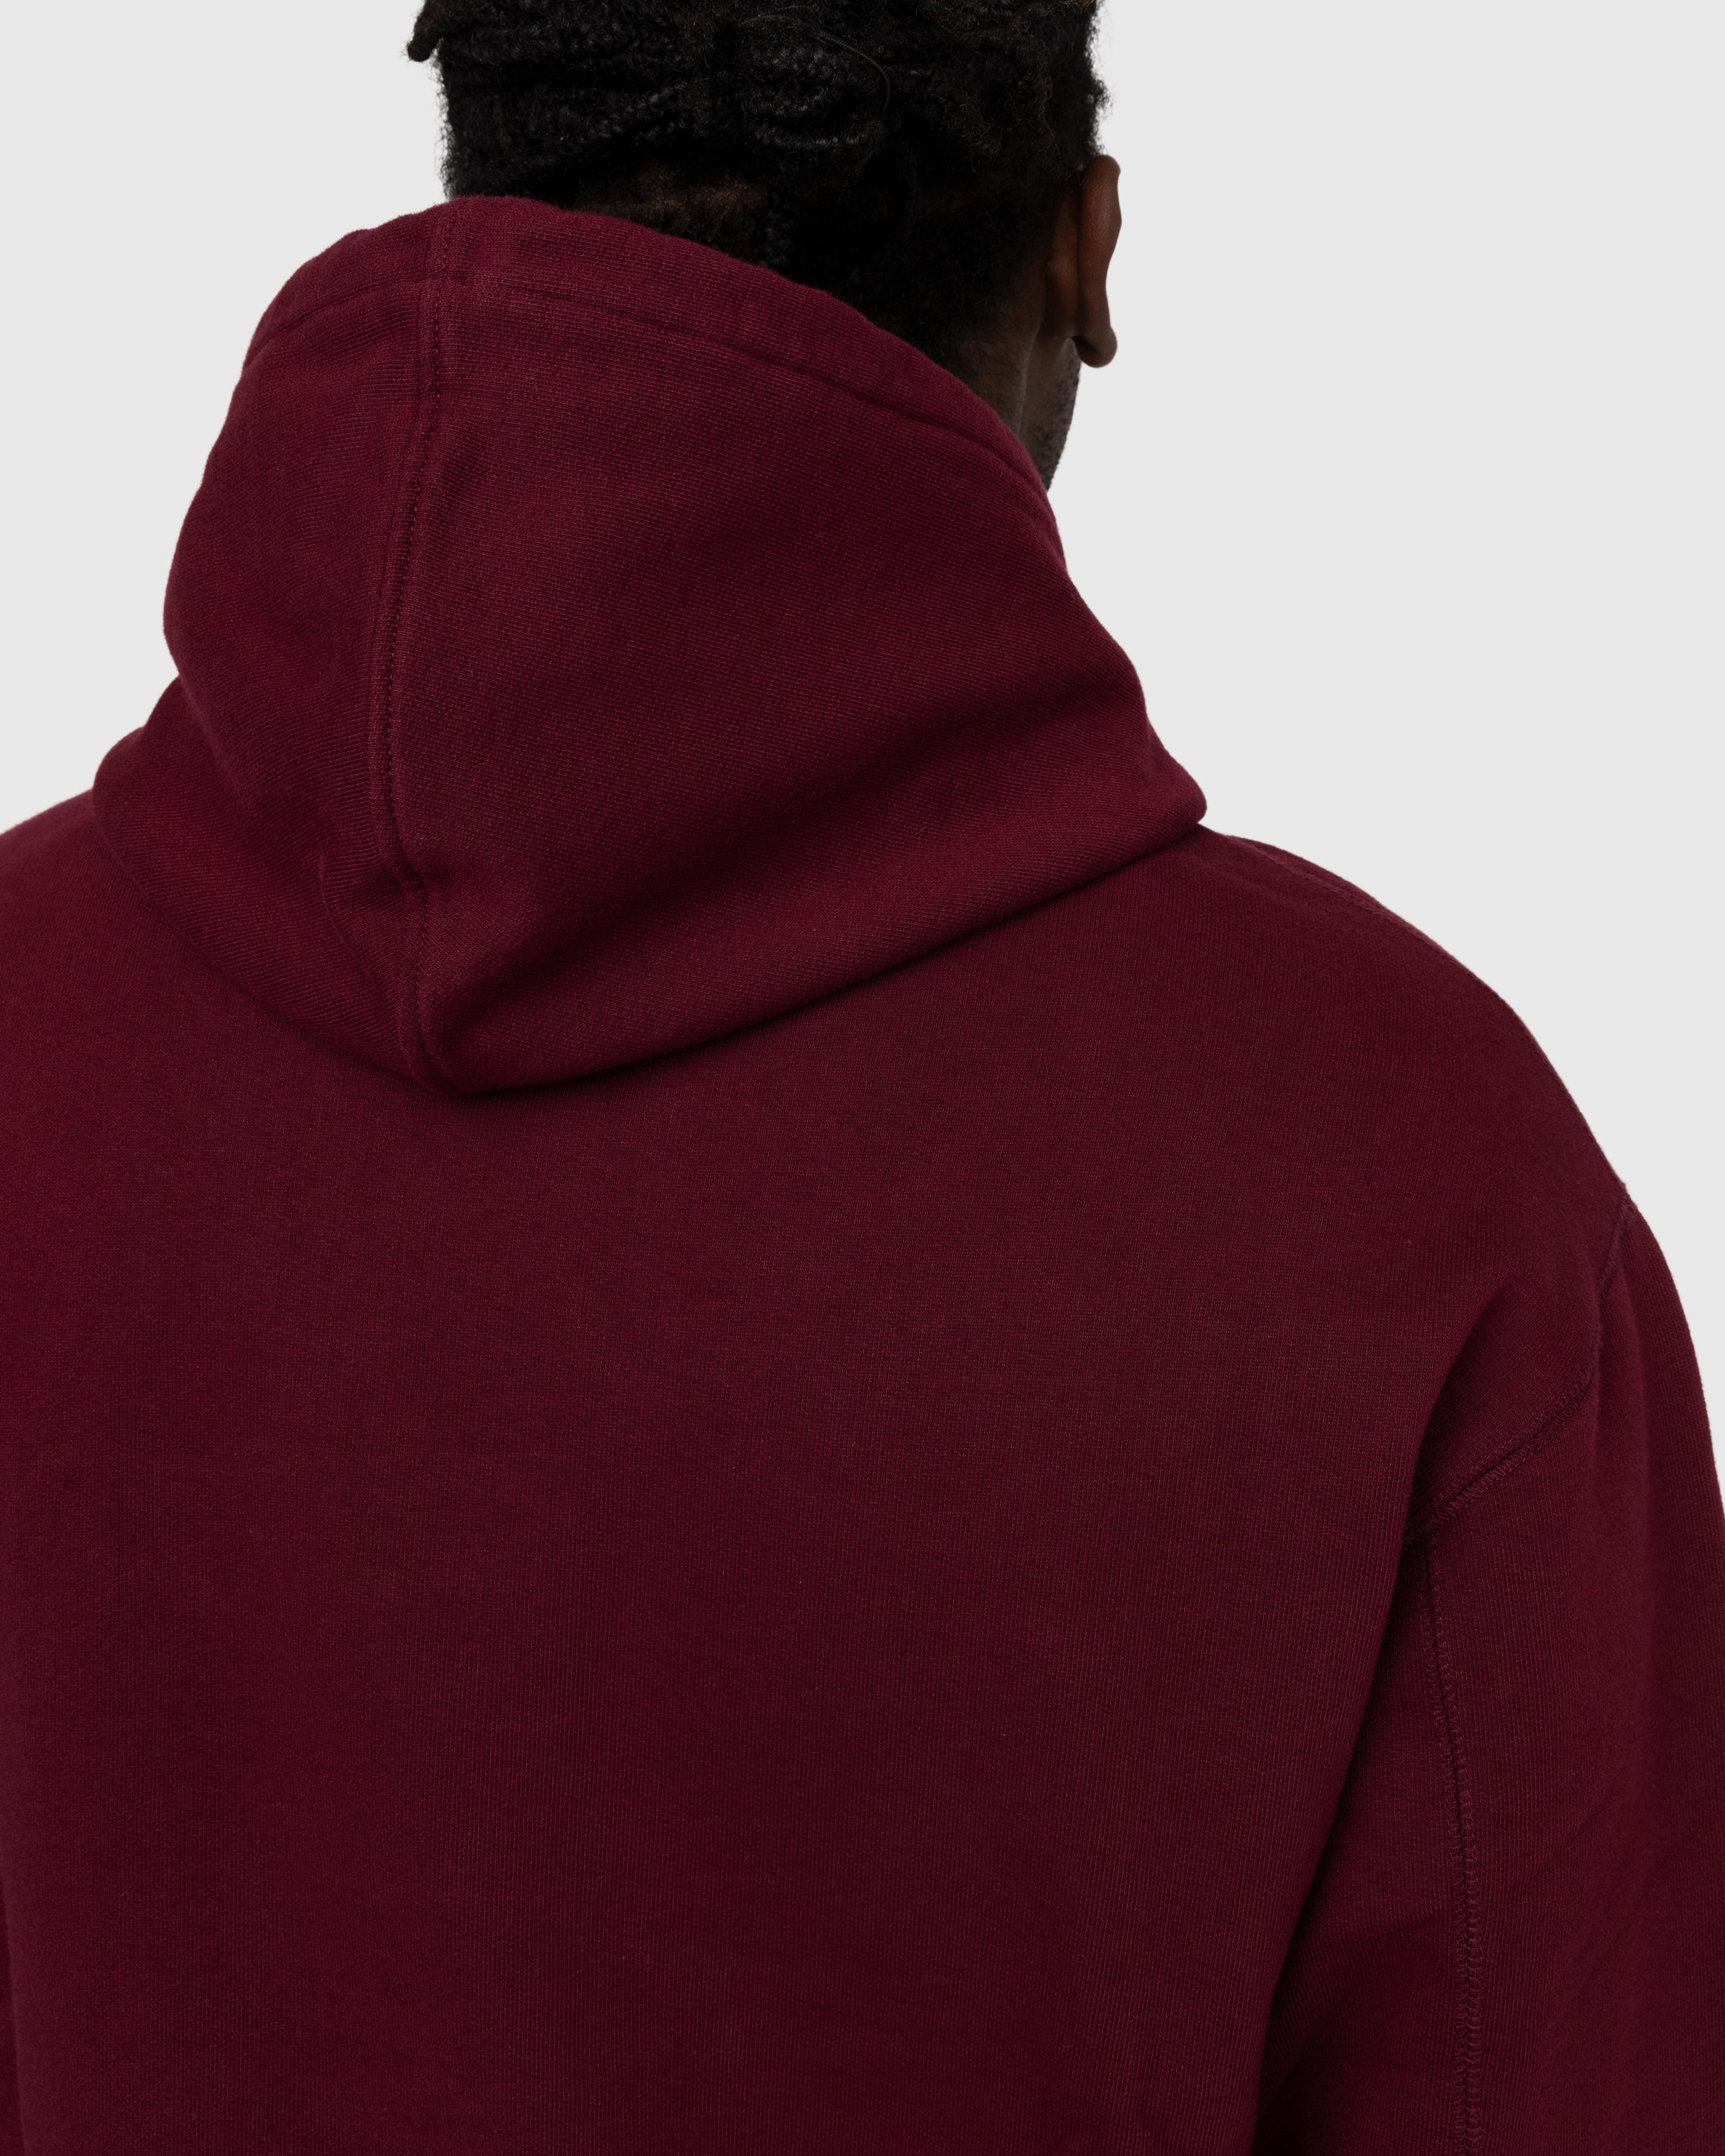 Highsnobiety - Classic Fleece Hoodie Bordeaux - Clothing - Red - Image 5